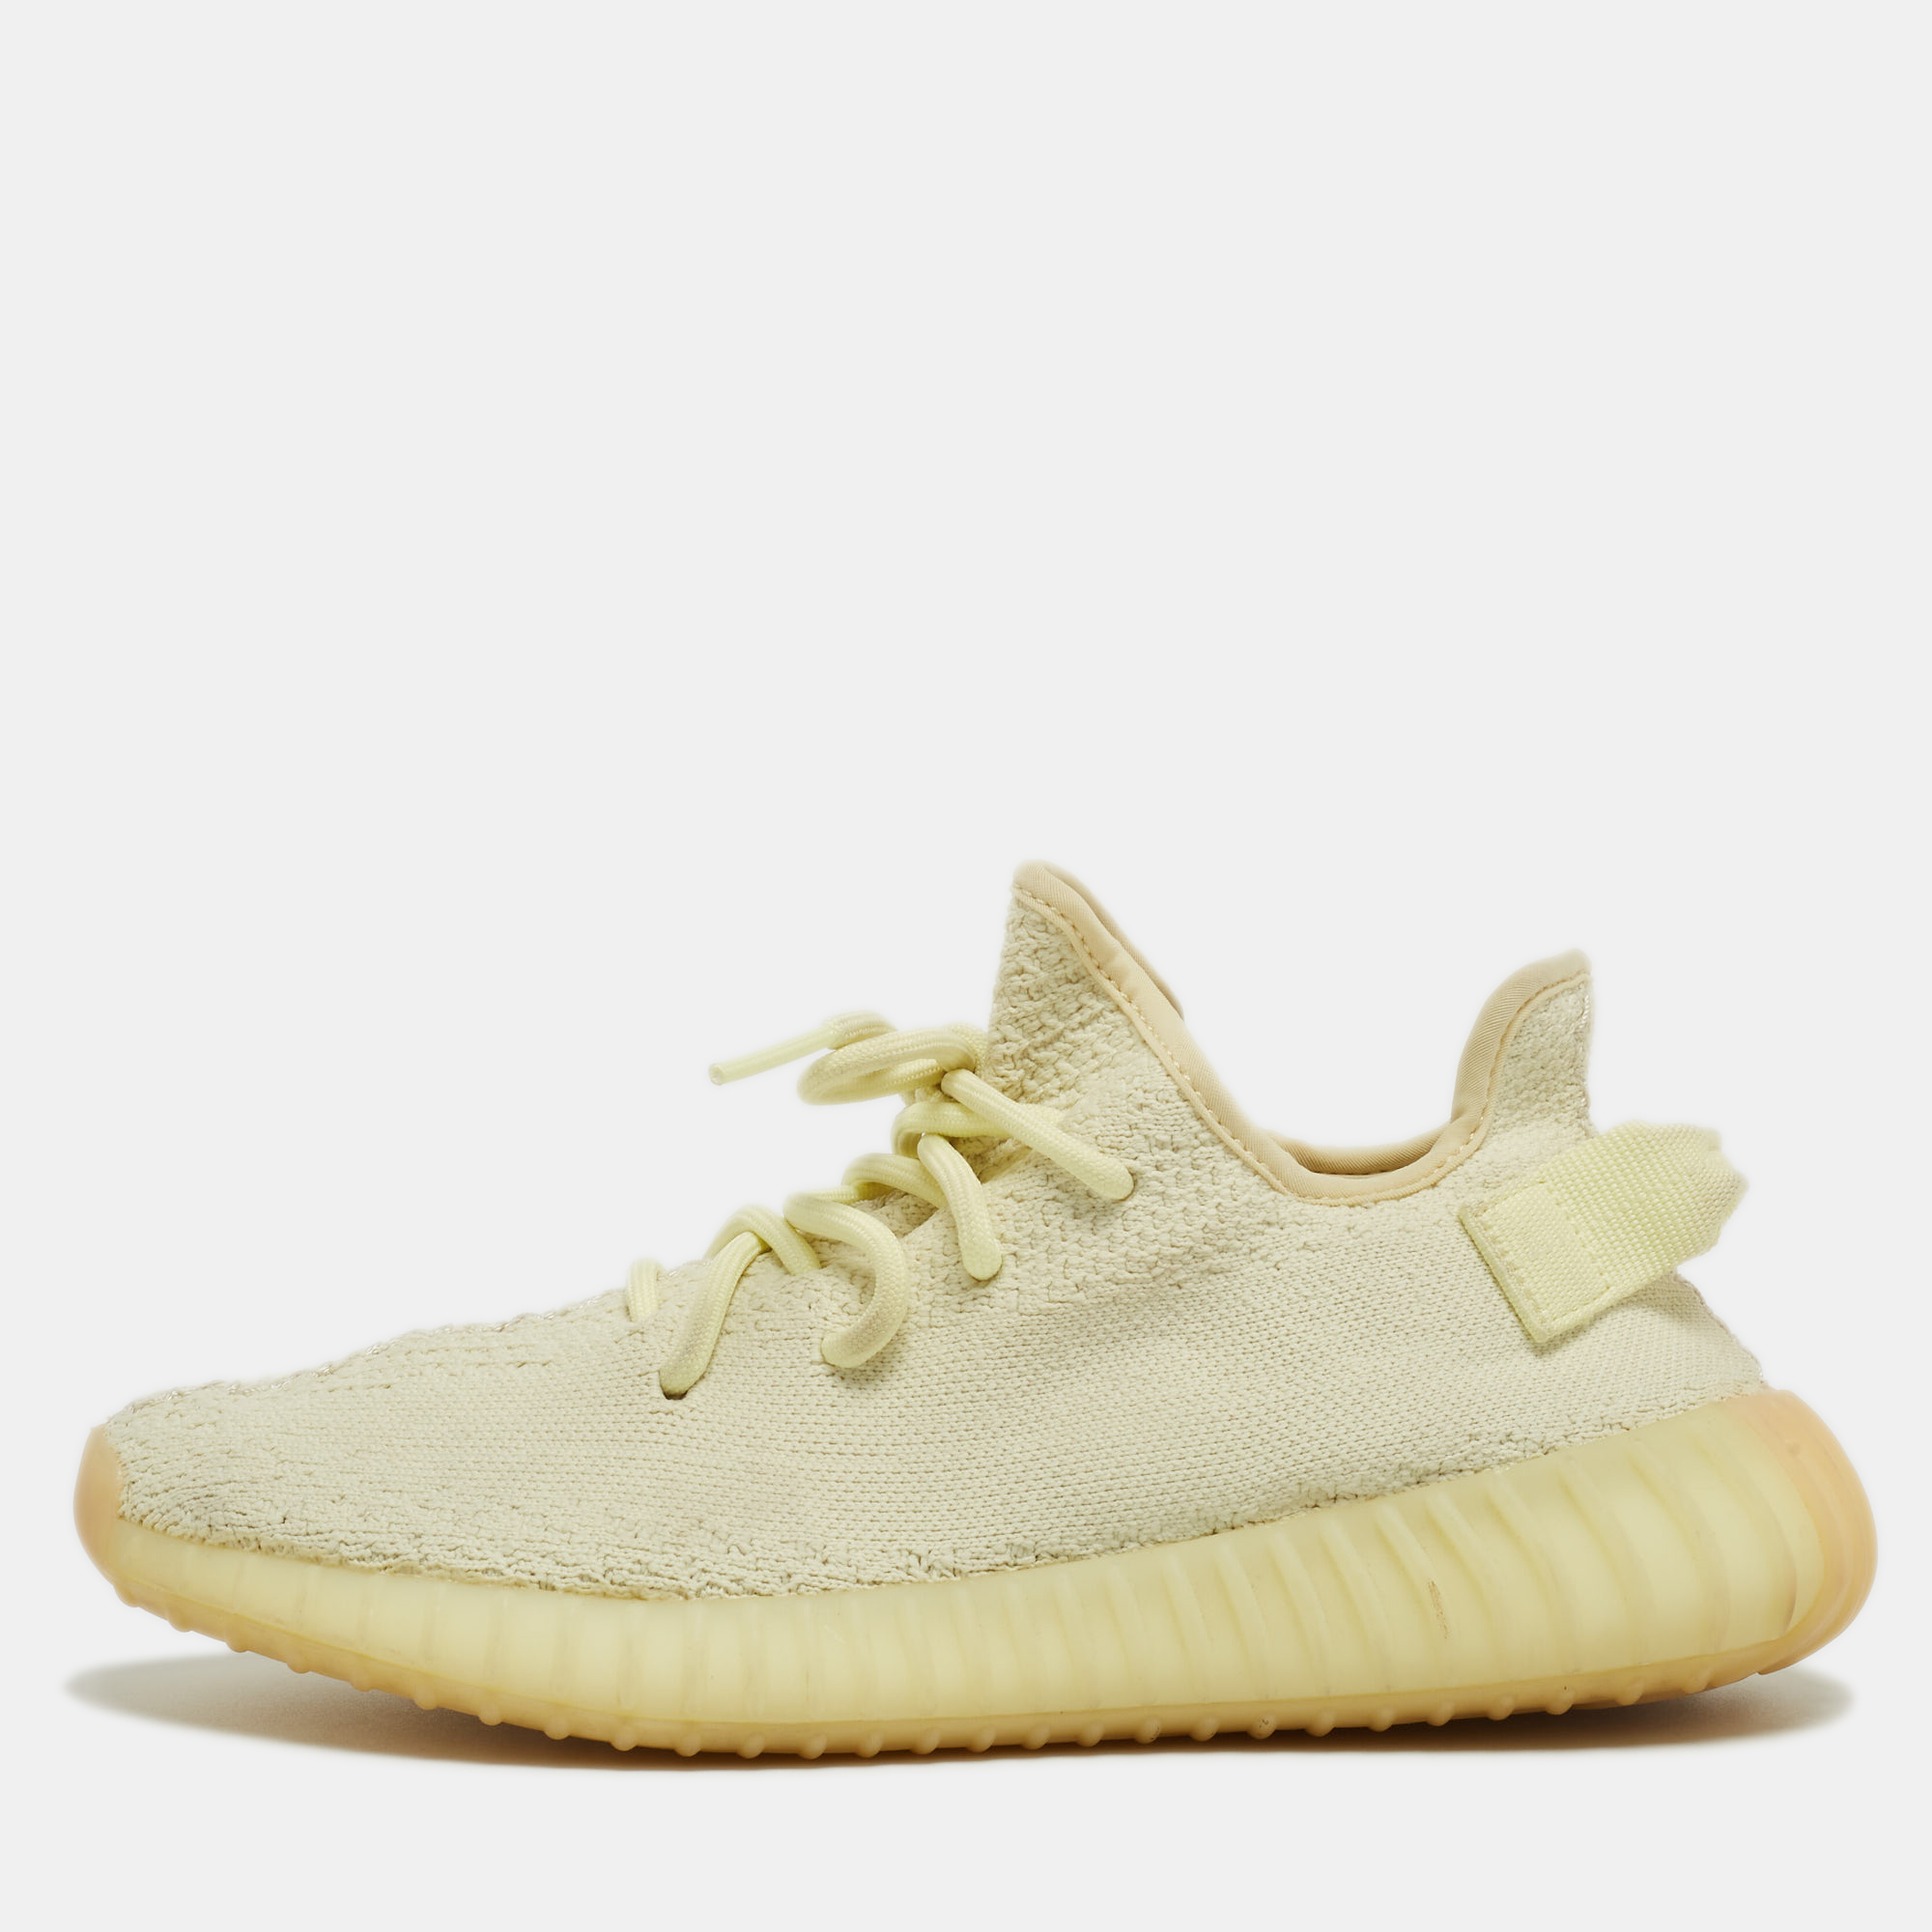 

Yeezy x Adidas Light Yellow Knit Fabric Boost 350 V2 Butter Sneakers Size 39 1/3